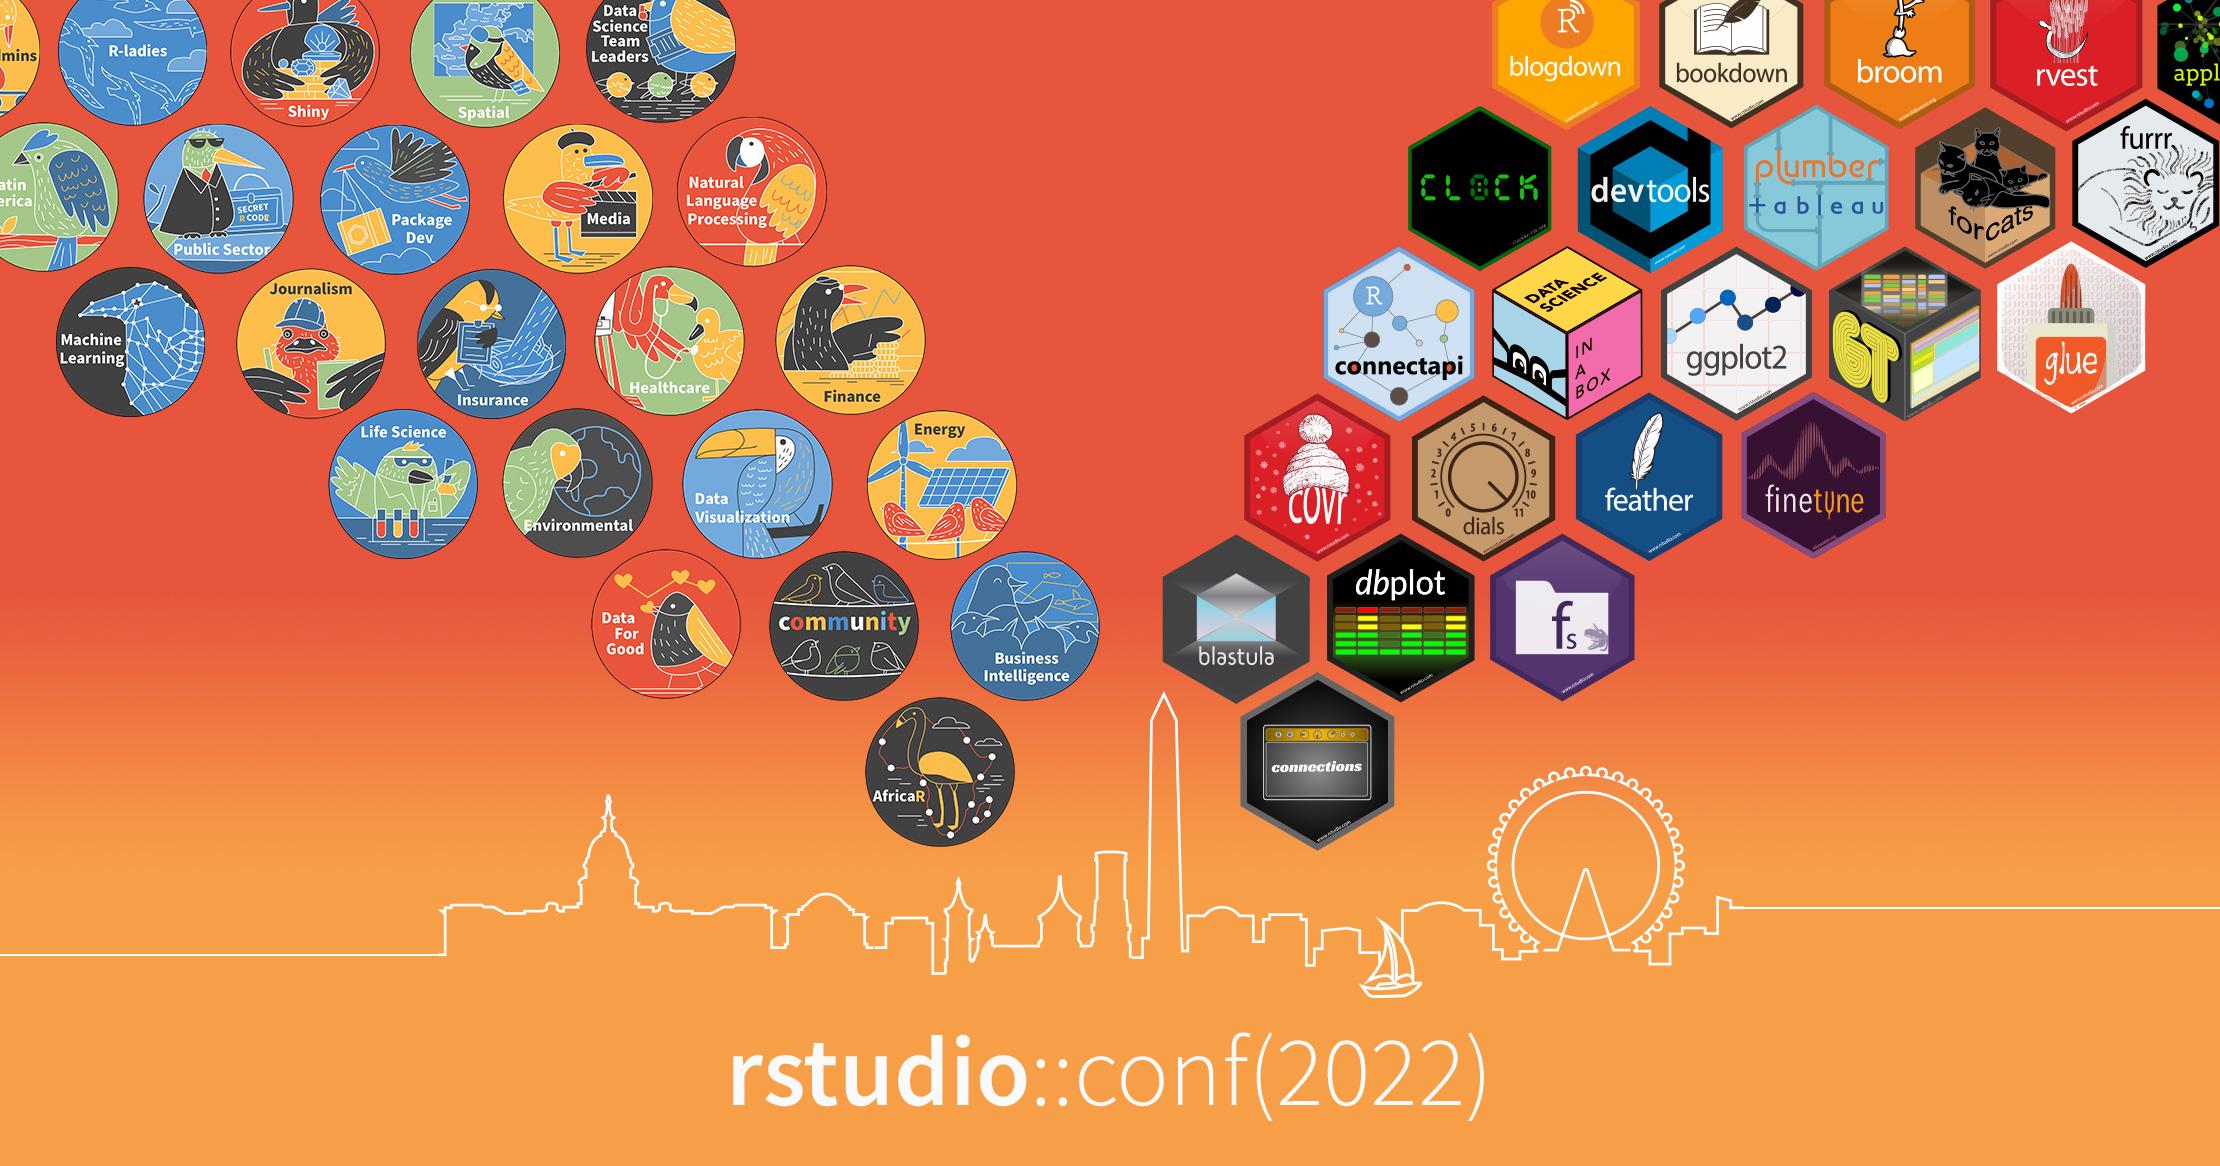 Thumbnail National Harbor skyline outline with the words rstudio conf 2022 underneath. Above the skyline float birds of a feather buttons with the names of the groups such as finance, life sciences on the left. On the right, hex stickers of various packages float towards the corner.